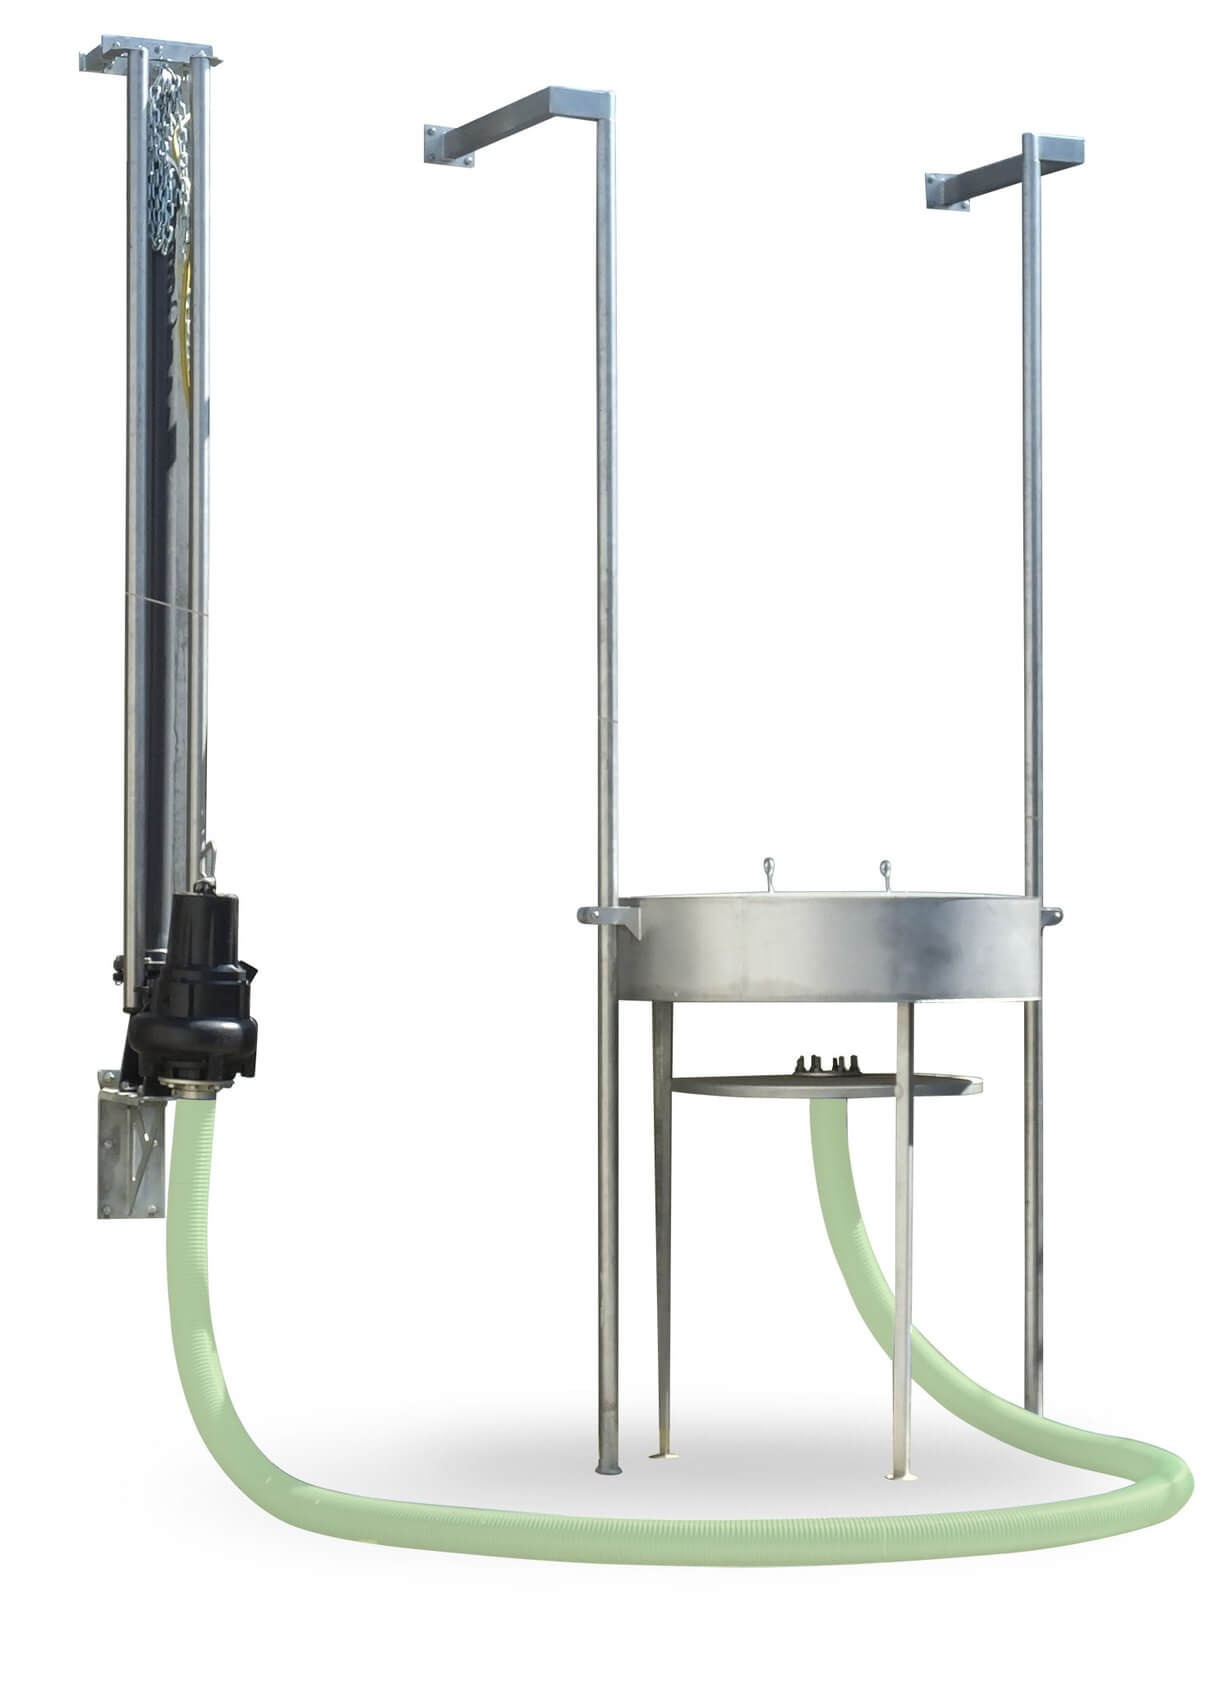 ATB-CWE Decanter with open discharge weir